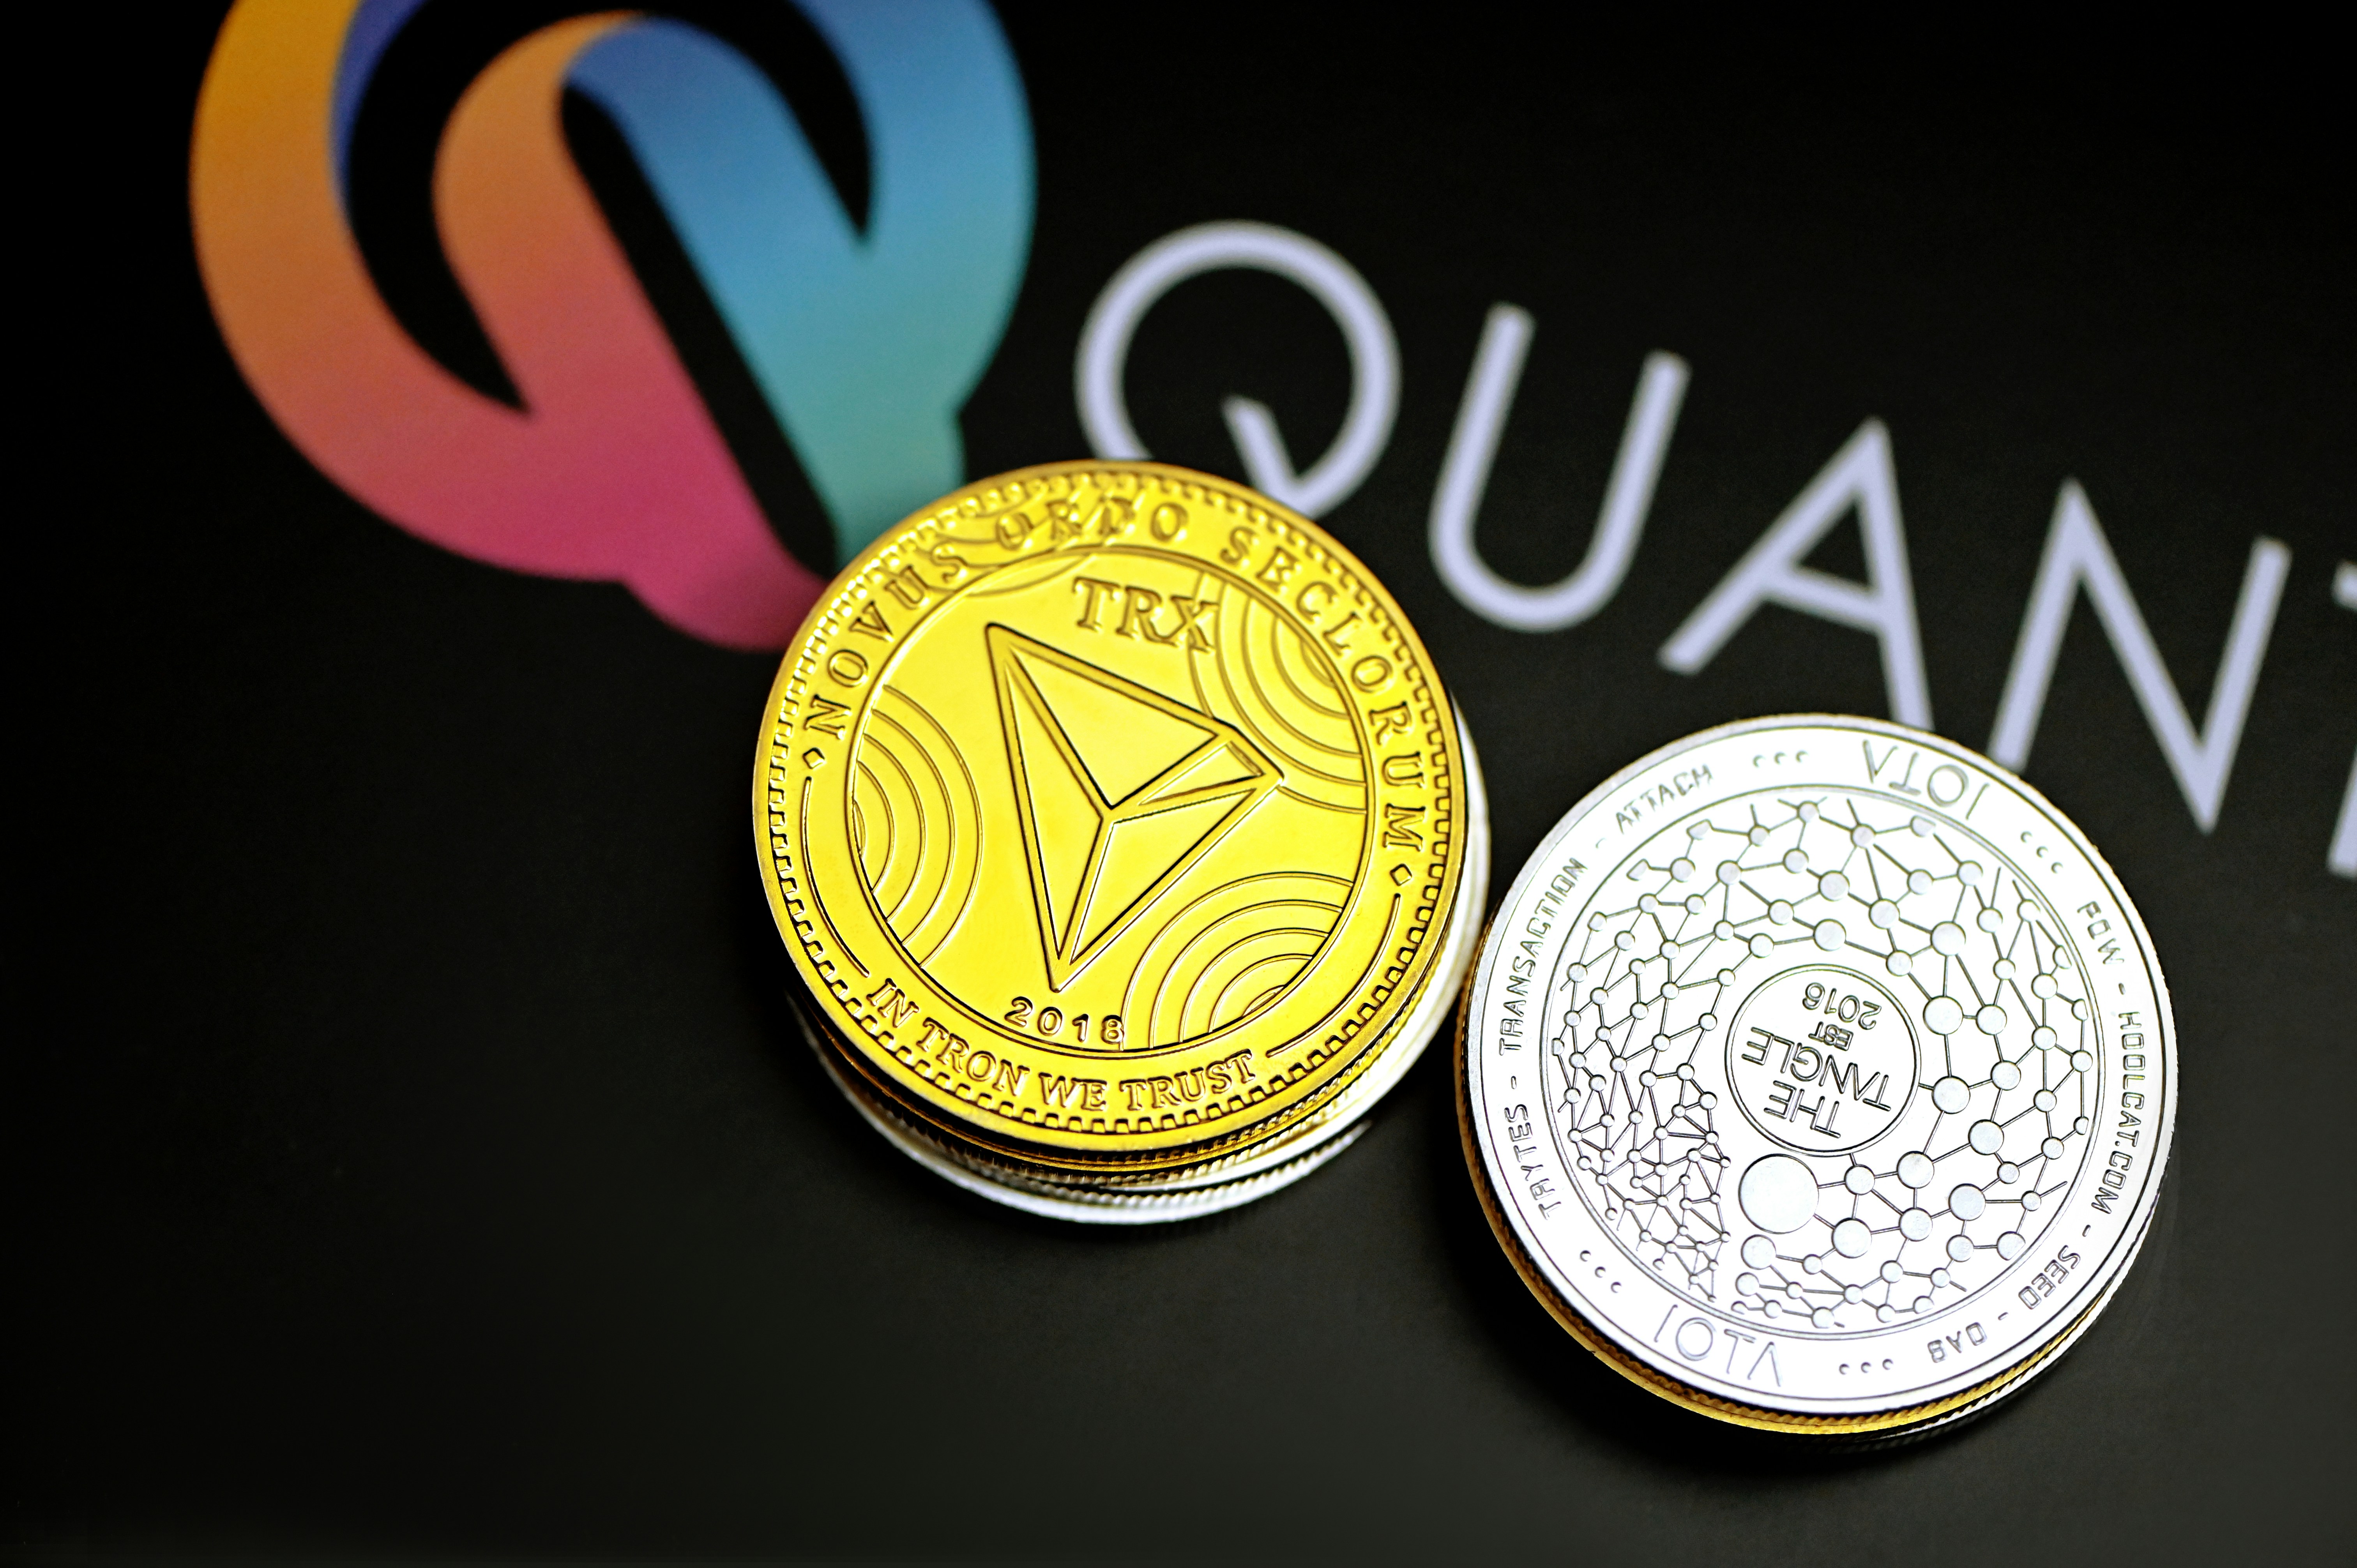 TRON coin and IOTA coin placed on the Quantitatives background